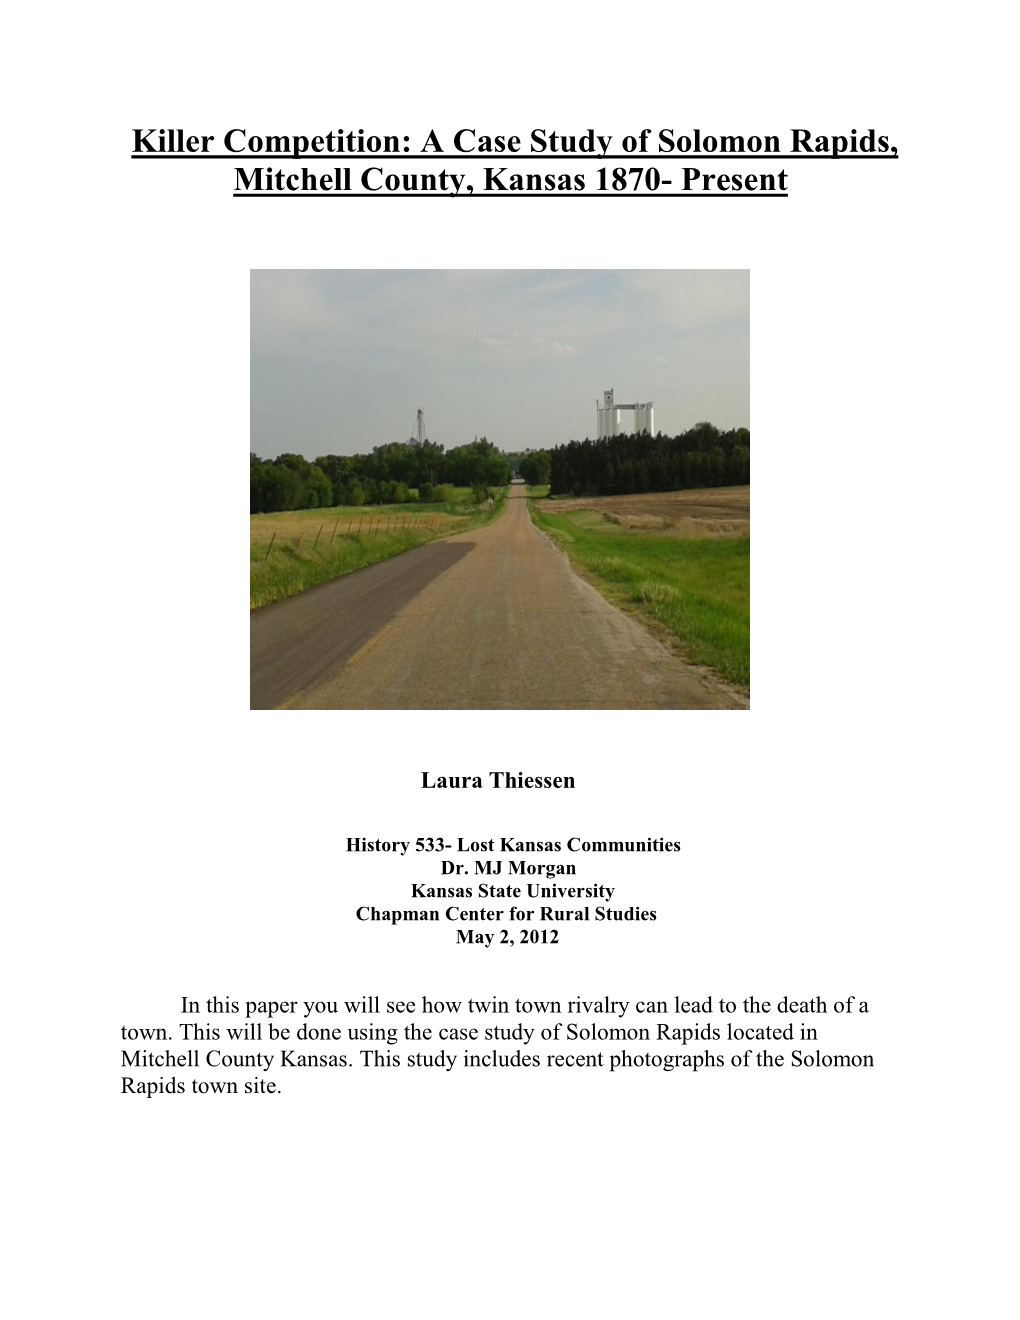 Killer Competition: a Case Study of Solomon Rapids, Mitchell County, Kansas 1870- Present